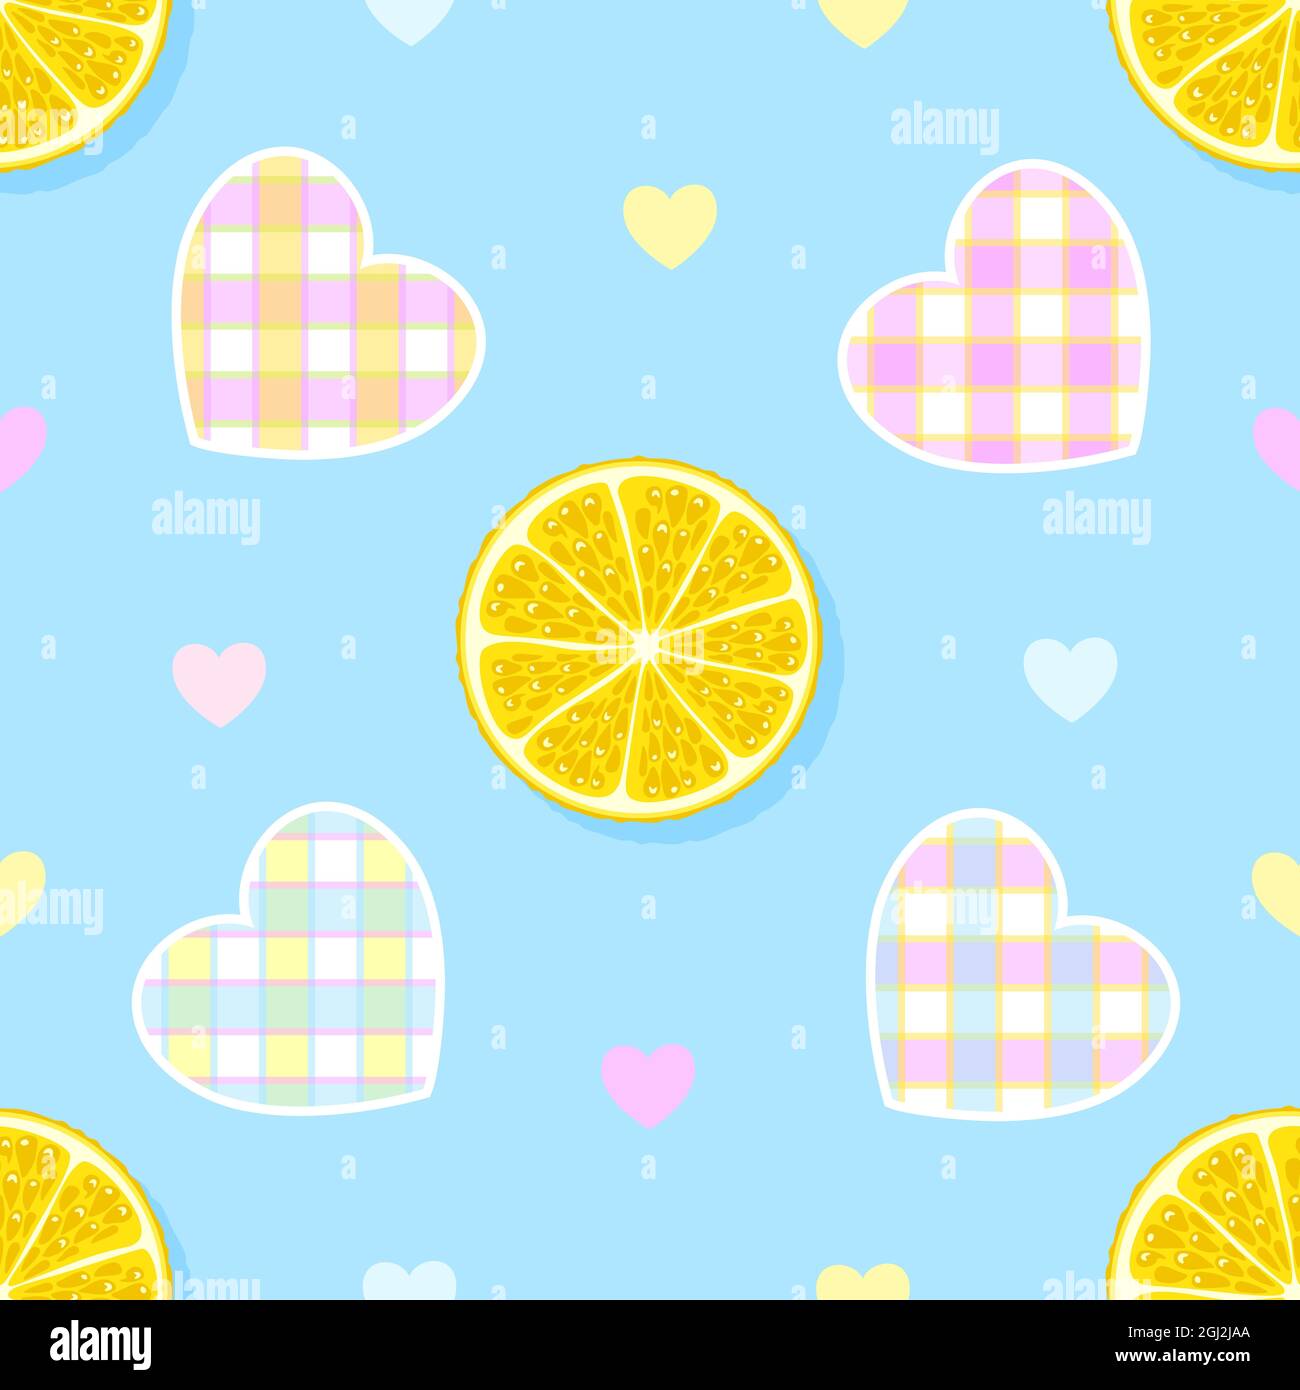 Seamless pattern of lemon slices with cute hearts in a box on a blue background. Vector illustration. Stock Vector